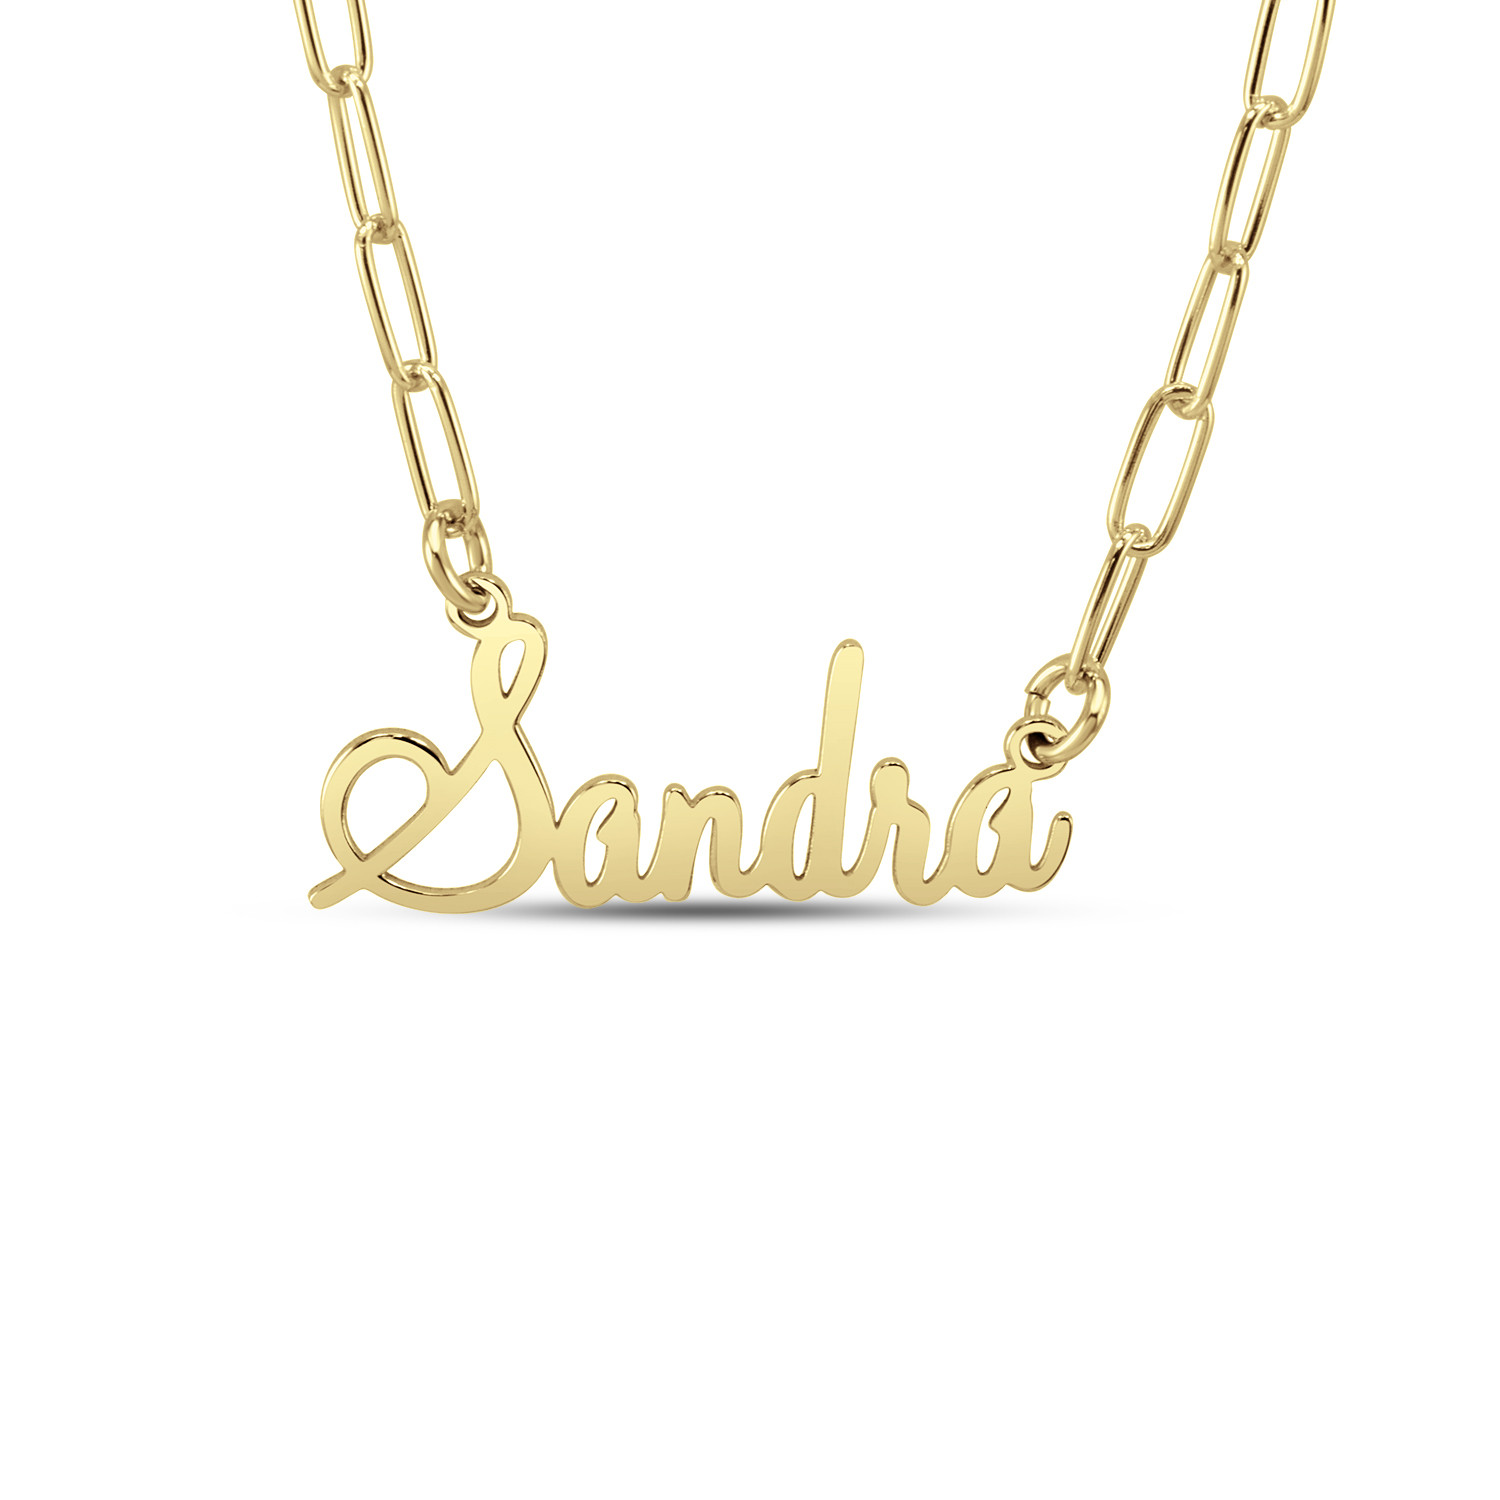 Hi Polish Name Pers Necklace